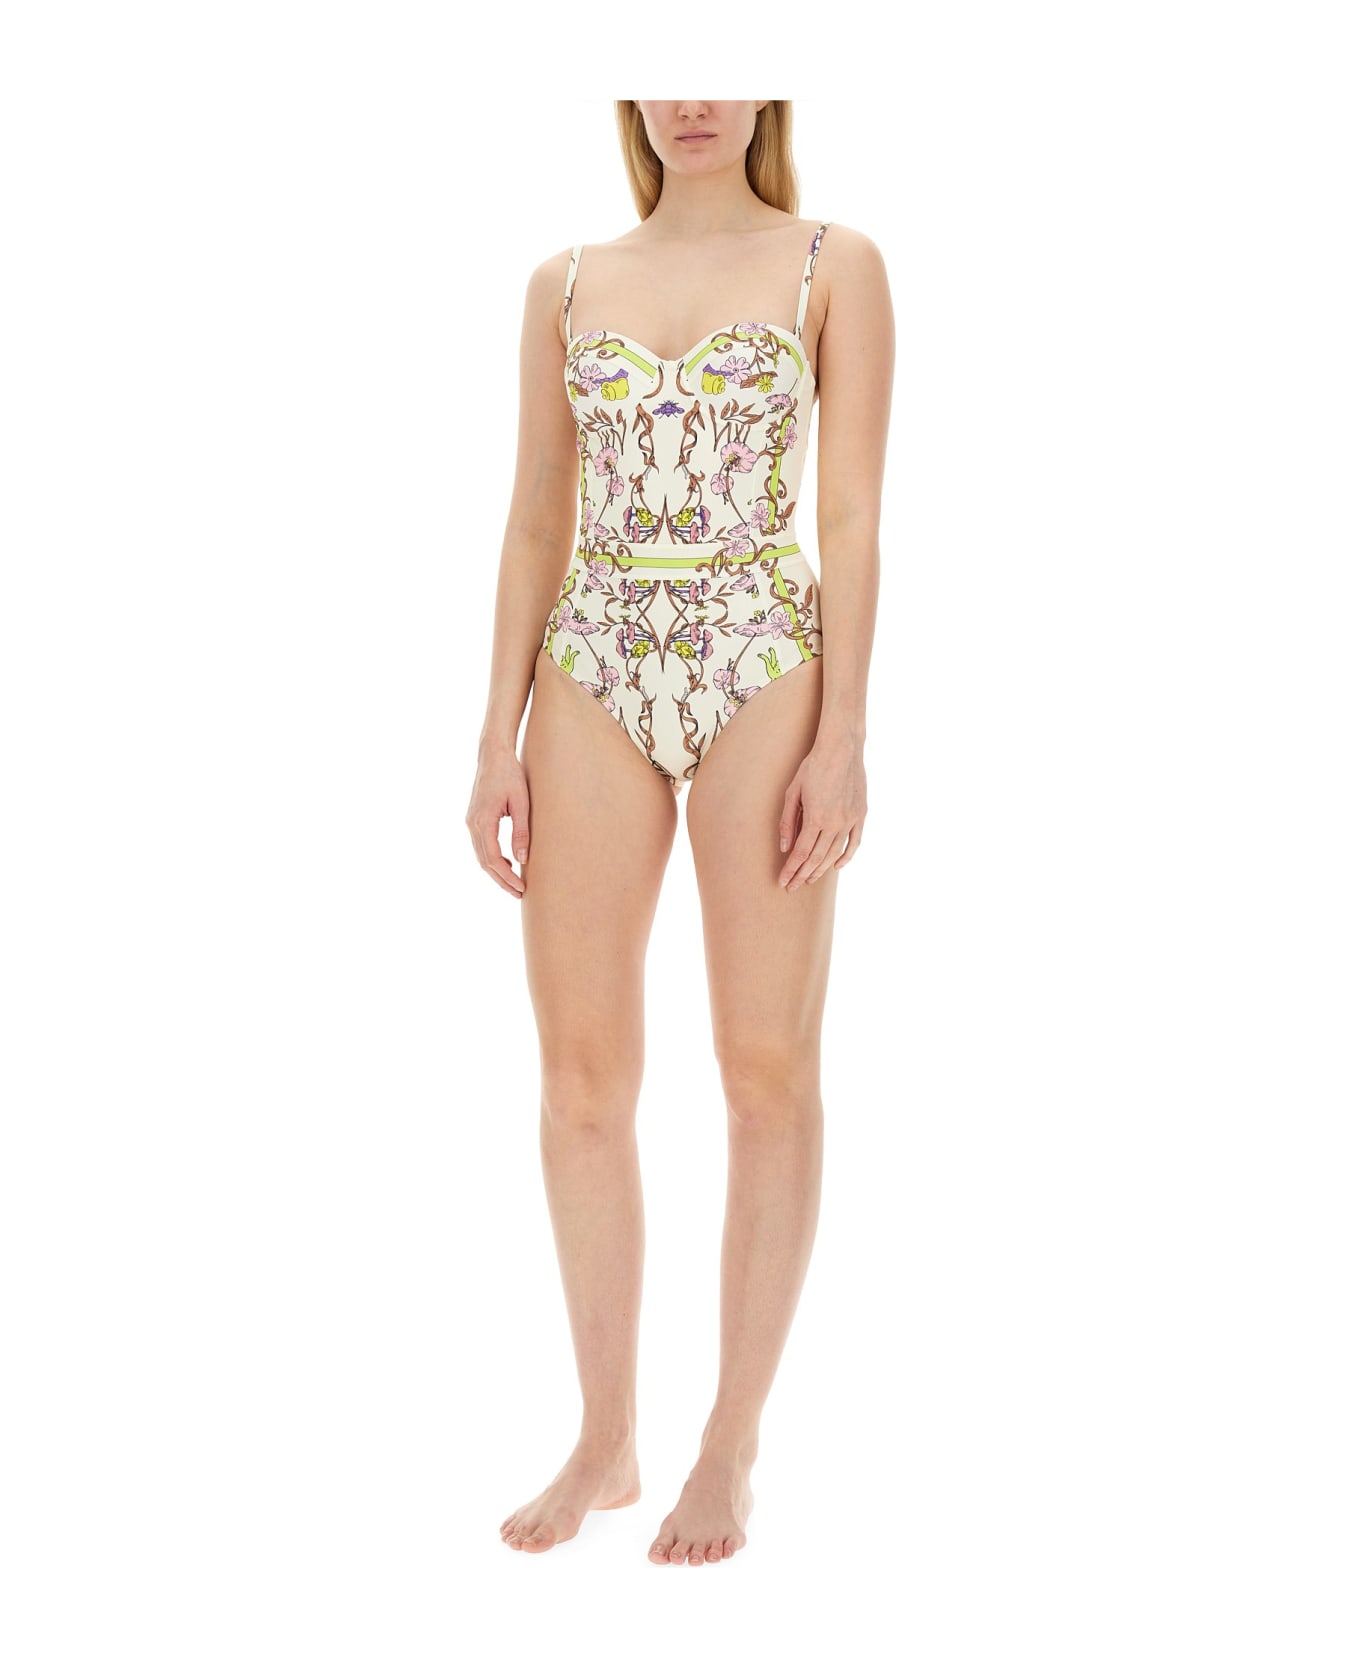 Tory Burch One Piece Swimsuit With Print - MULTICOLOR 水着